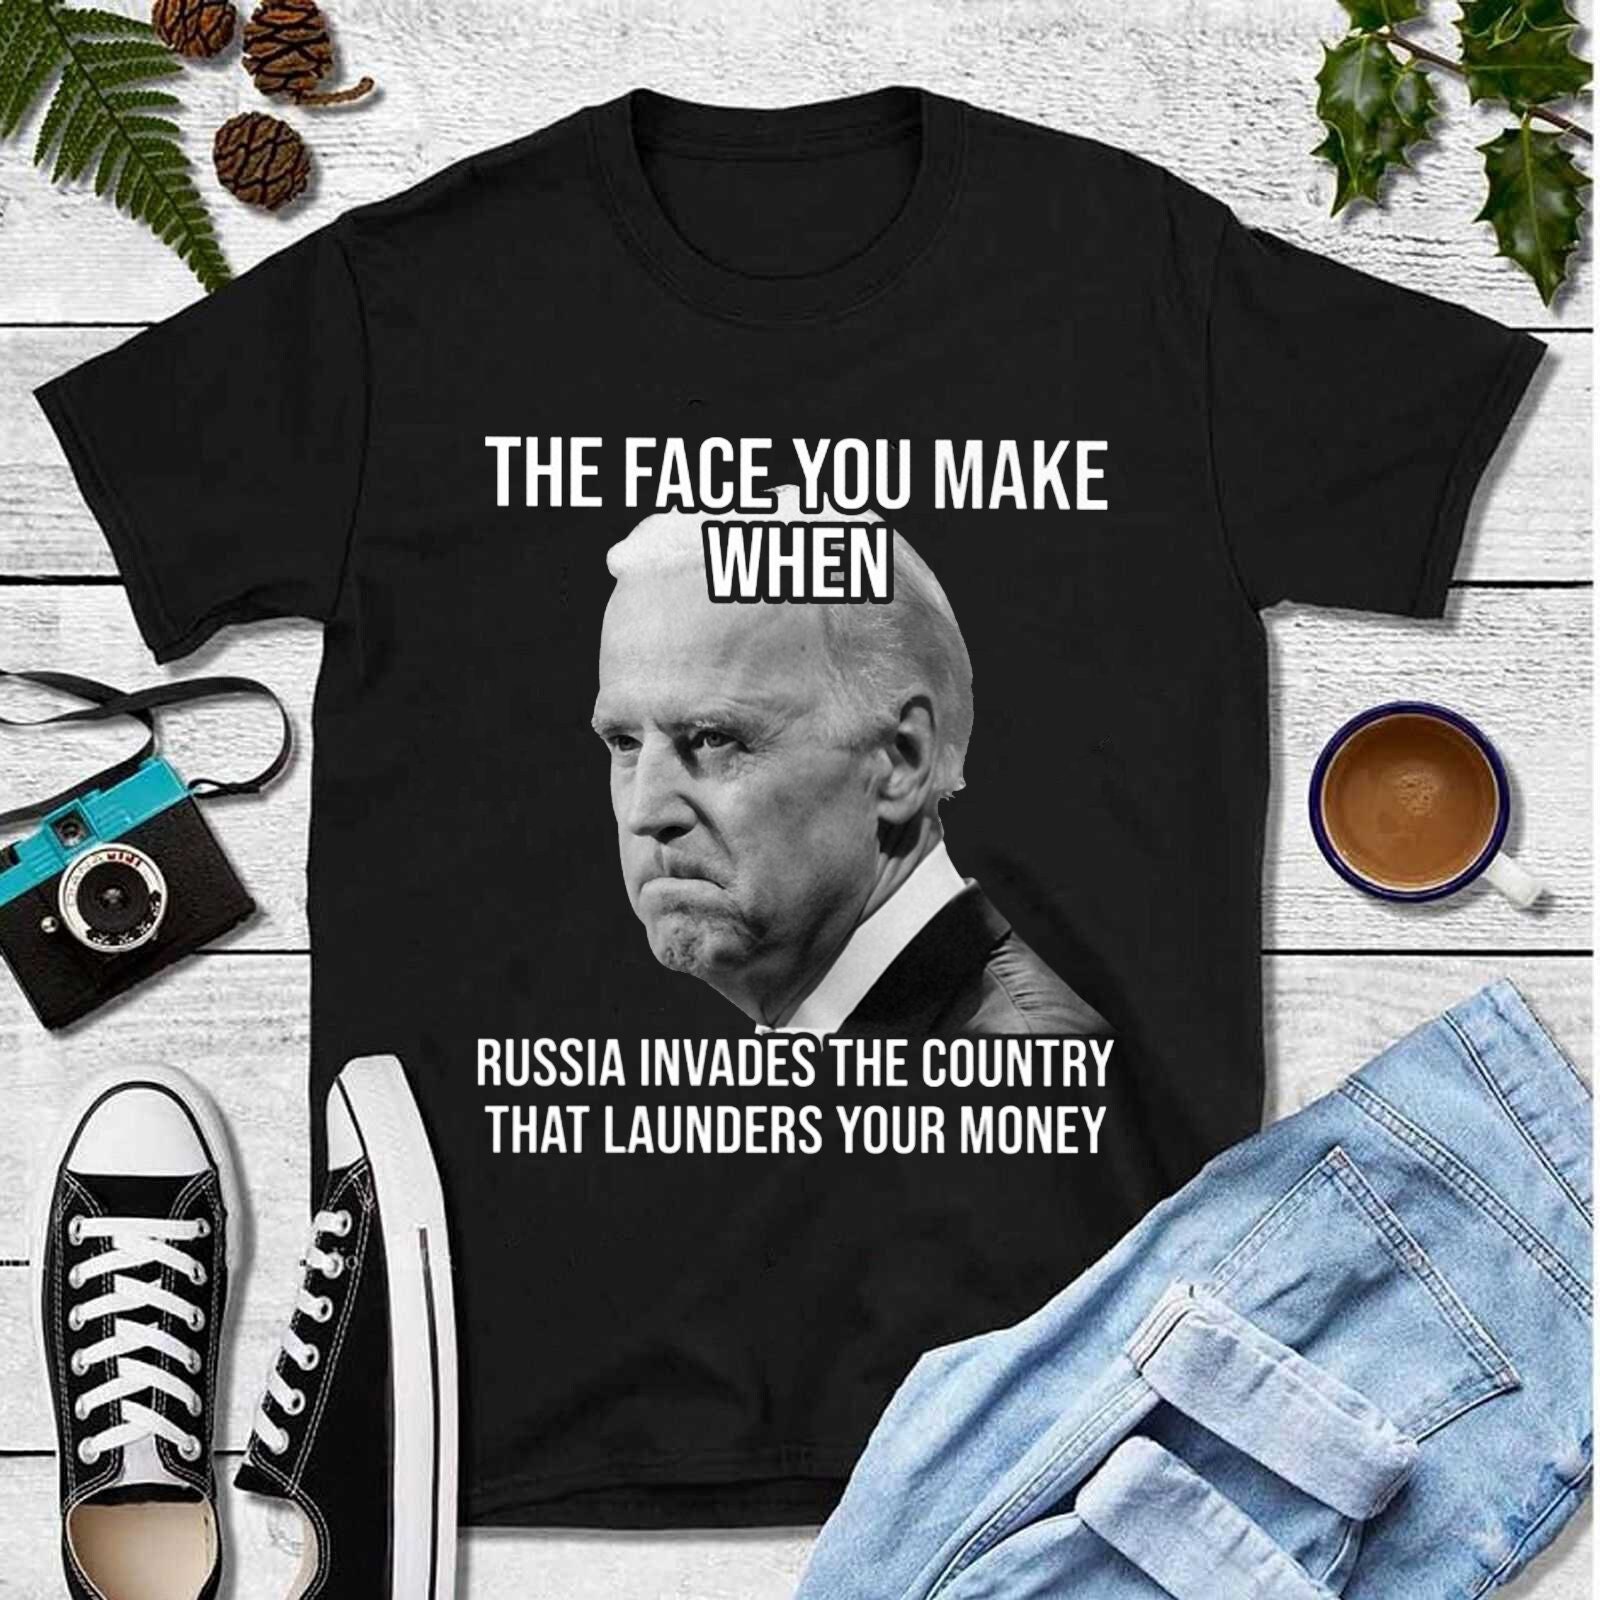 The Face You Make When Russia Invades The Country That Launders Your Money Unisex T-Shirt